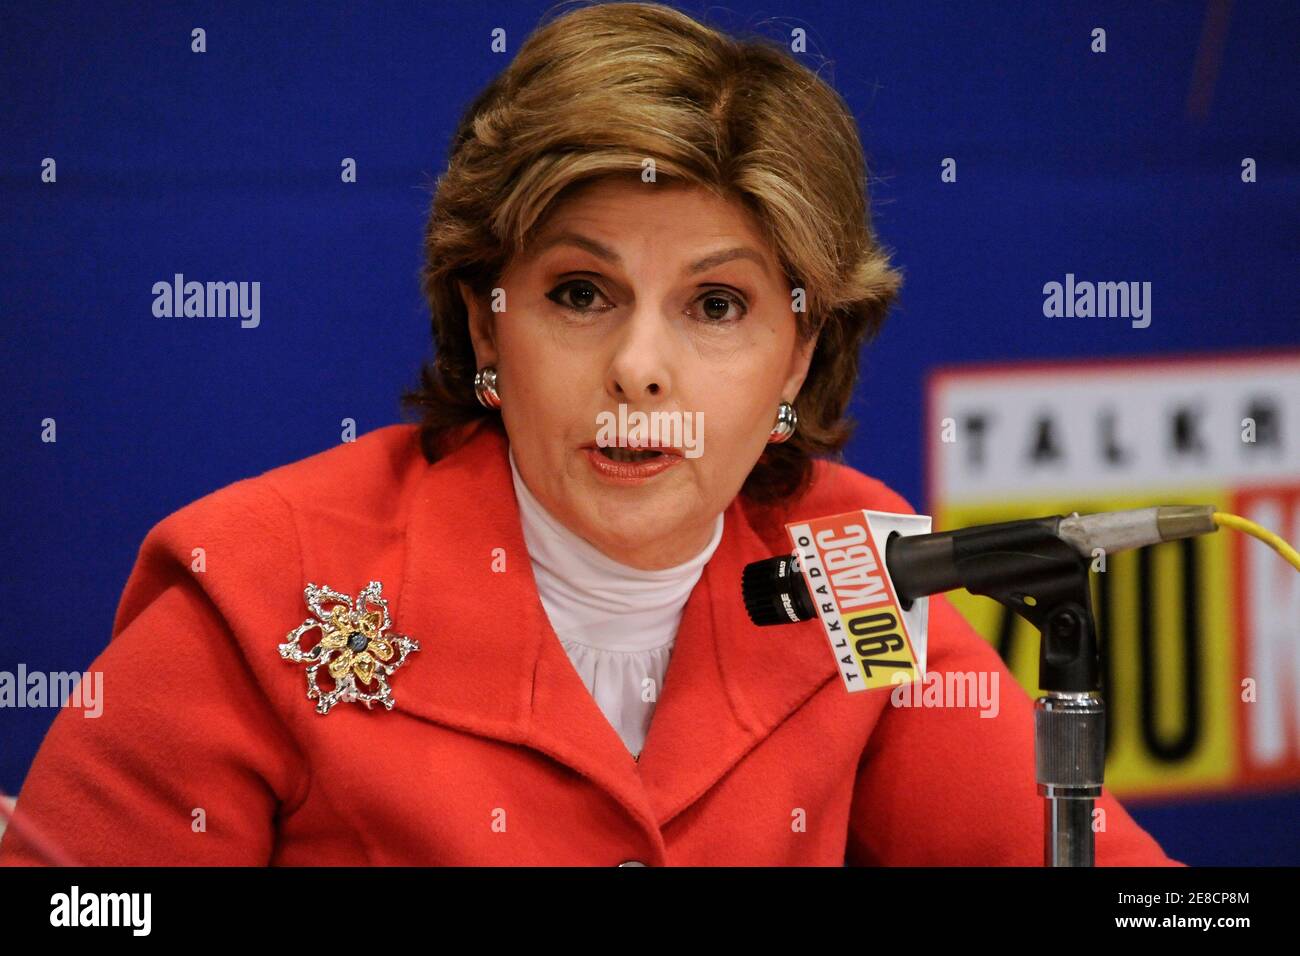 Attorney Gloria Allred answers questions from the media on behalf of her her client, Veronica Siwik-Daniels in Los Angeles, California, February 19, 2010, after watching the telecast of Tiger Woods' news conference. Siwik-Daniels, also known as Joslyn James, is a former porn star and alleged mistress of Tiger Woods. REUTERS/Gus Ruelas (UNITED STATES - Tags: SPORT GOLF) Stock Photo